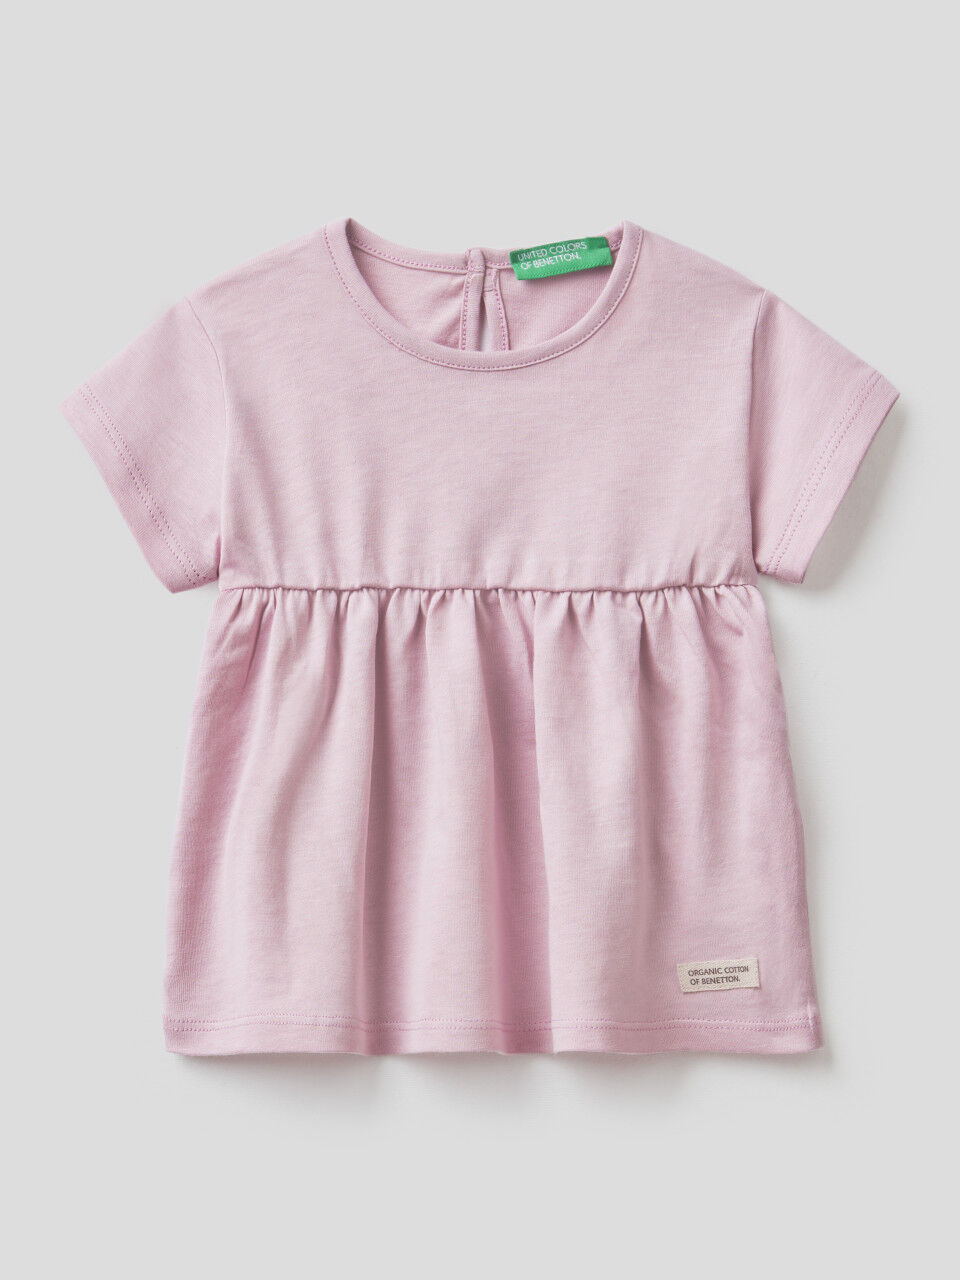 T-shirt in organic cotton with frill